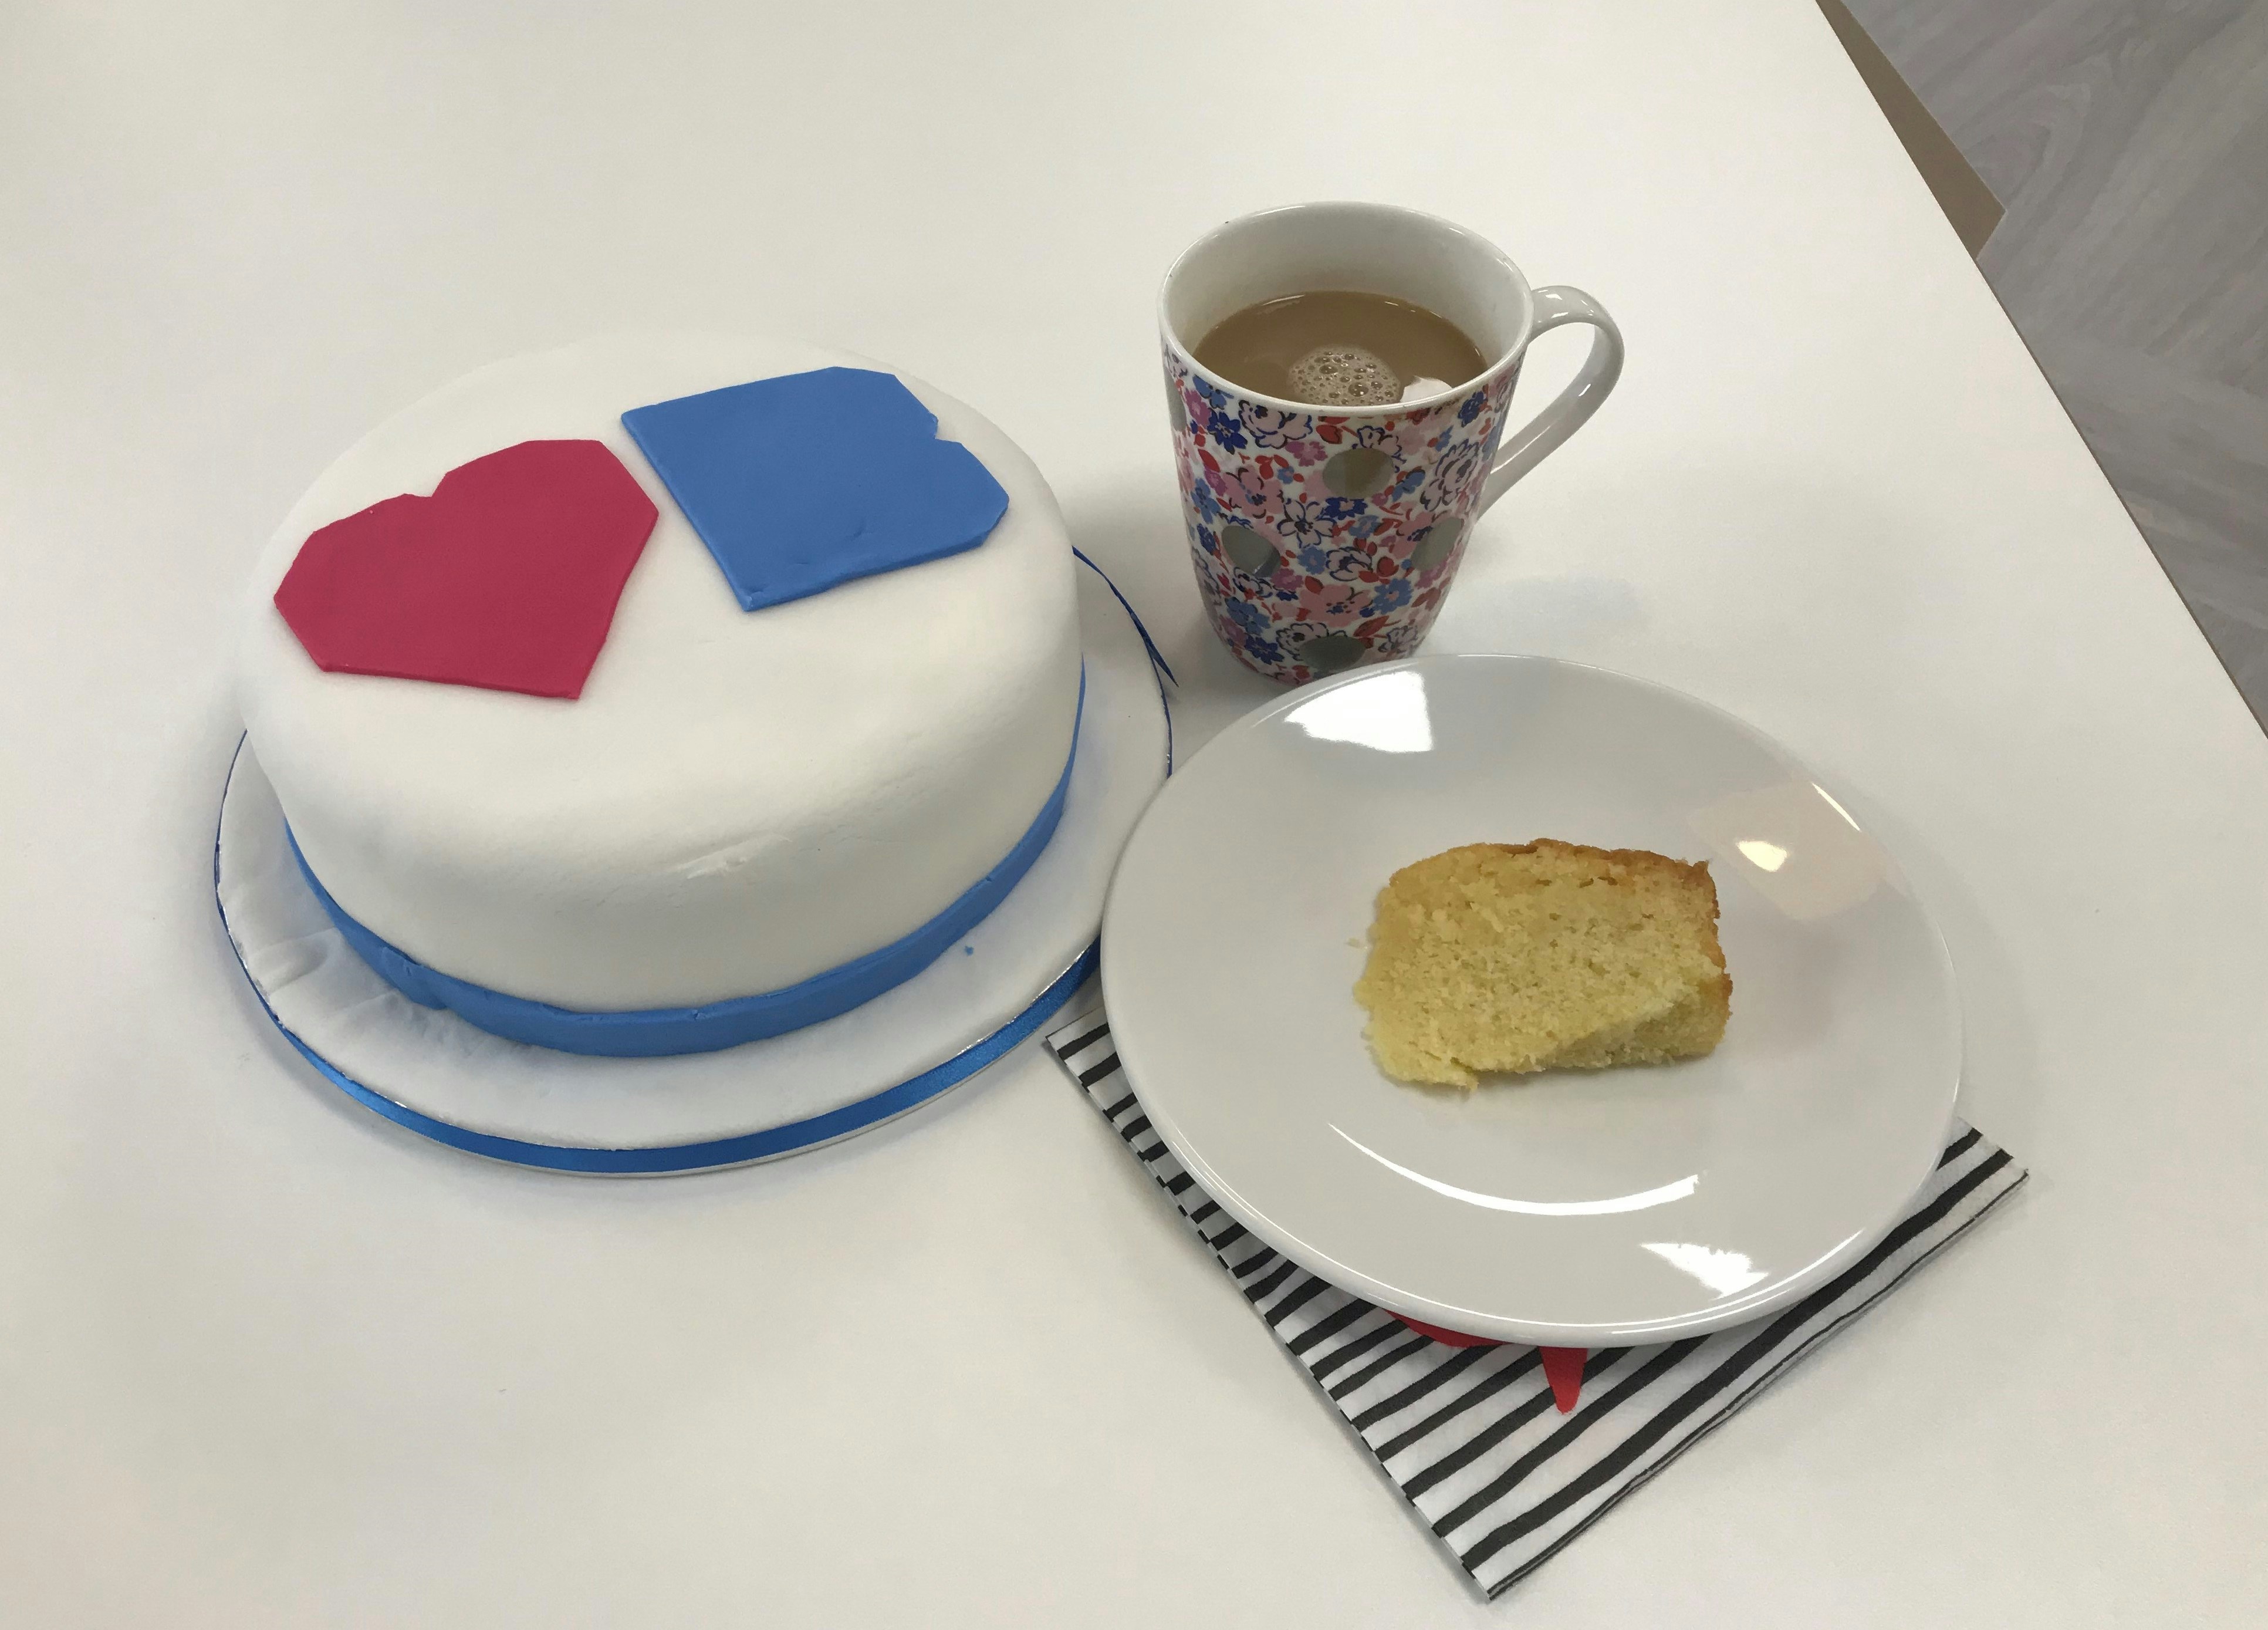 A cake with white icing and the Love Basingstoke logo on. It sits on a cake board with a blue ribbon around the bottom. Next to it is a cup of coffee and another slice of cake that is cut, lying on it's side on a plate. The plate sits on a napkin. All three items sit on a white table.